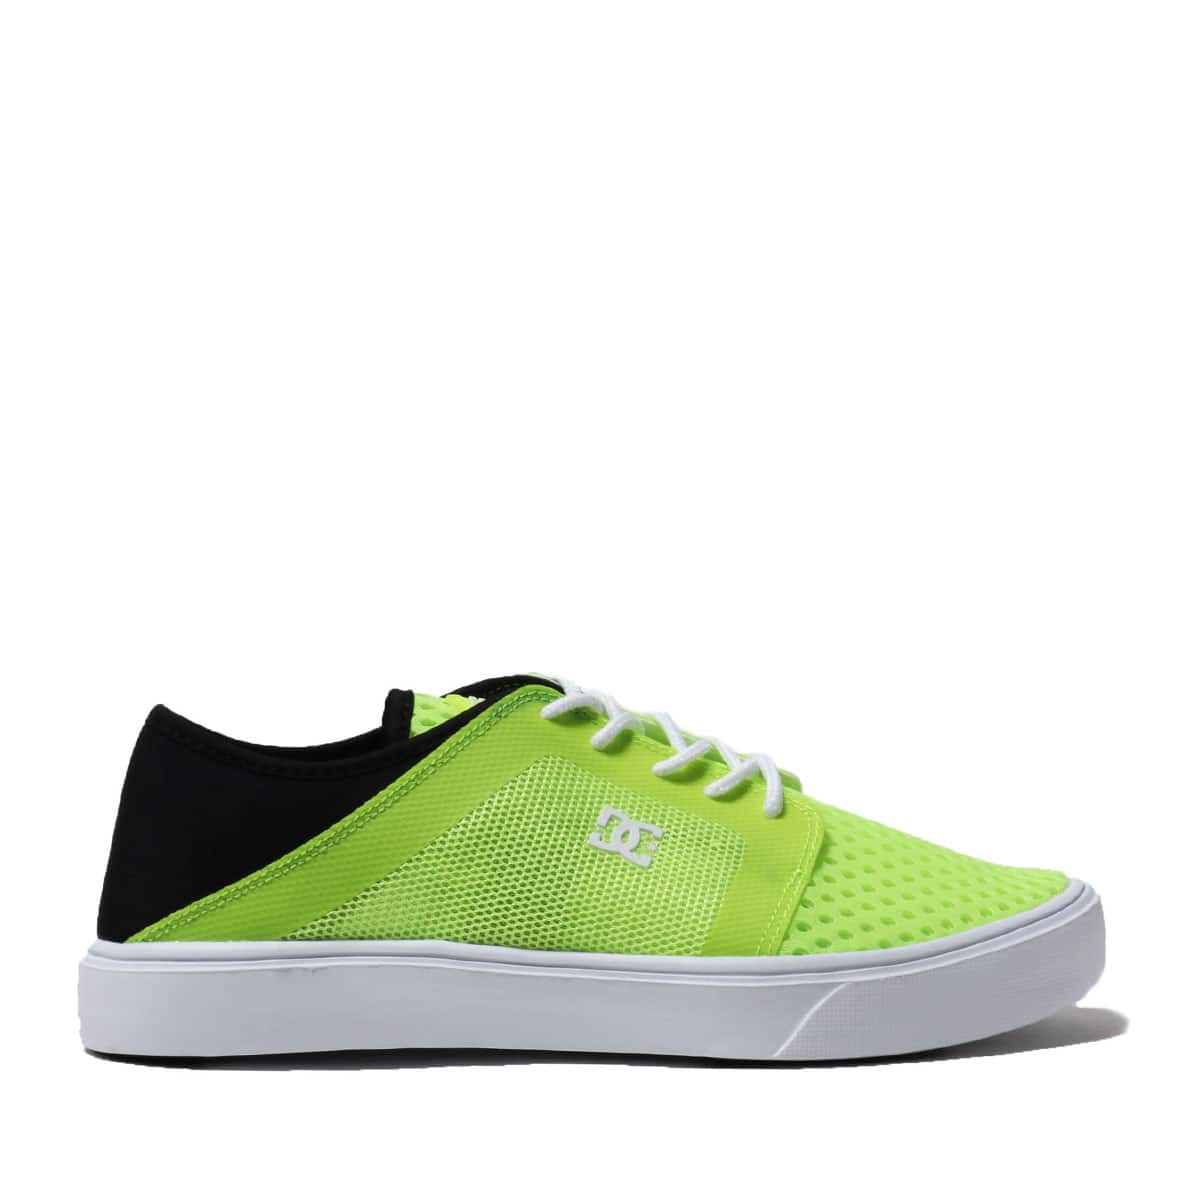 41 Limited Edition Dc shoes neon for Trend in 2022